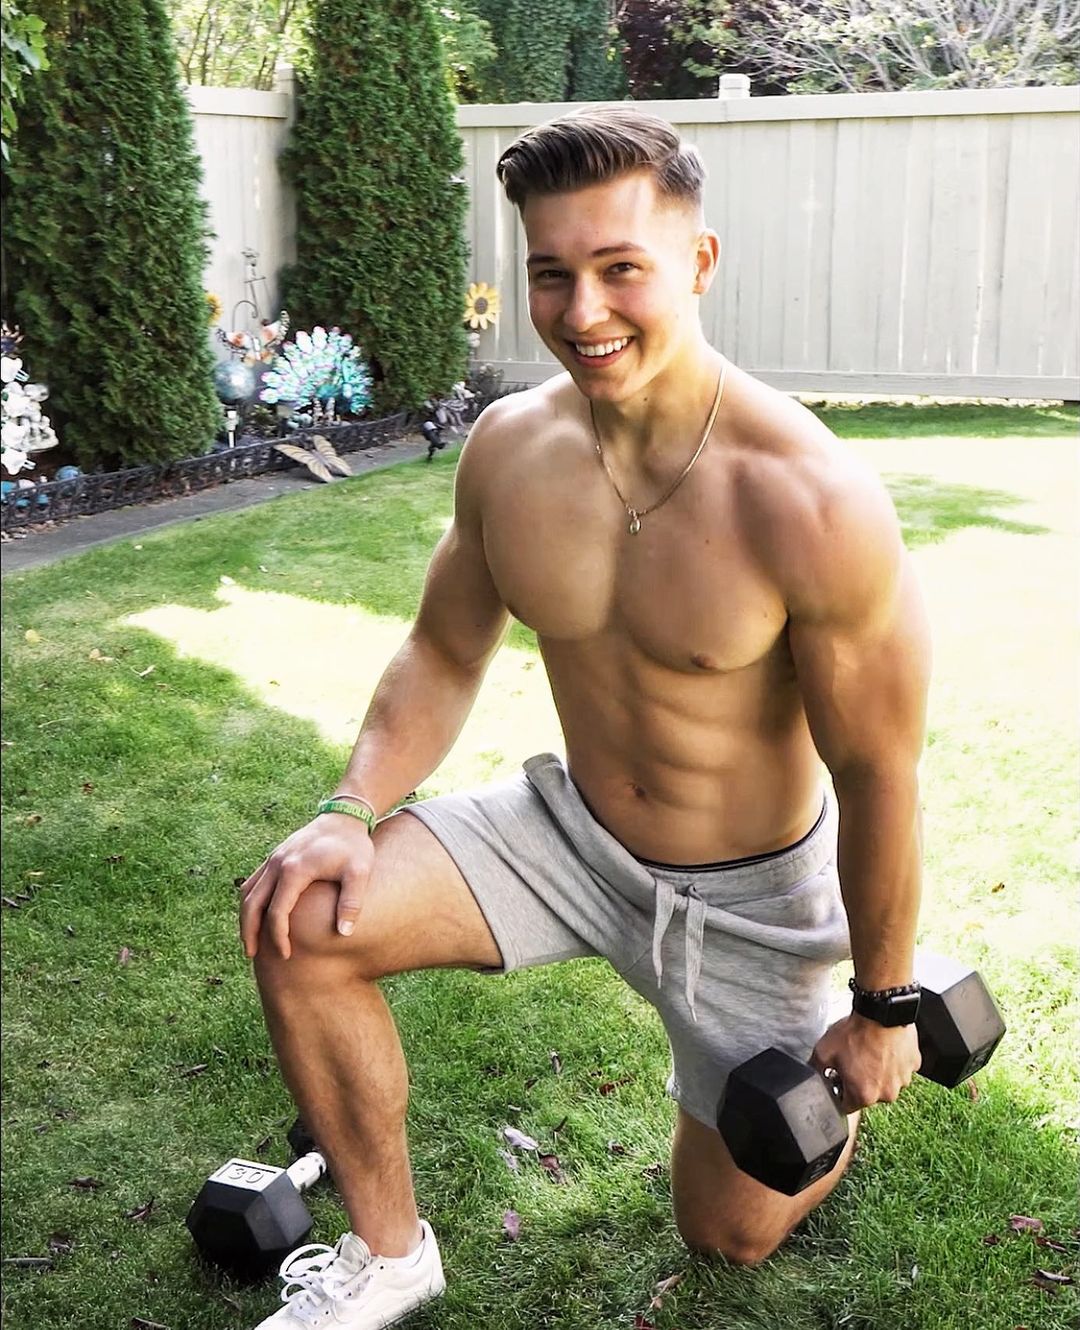 barechest-fit-summertime-body-guy-big-pecs-young-neighbor-smile